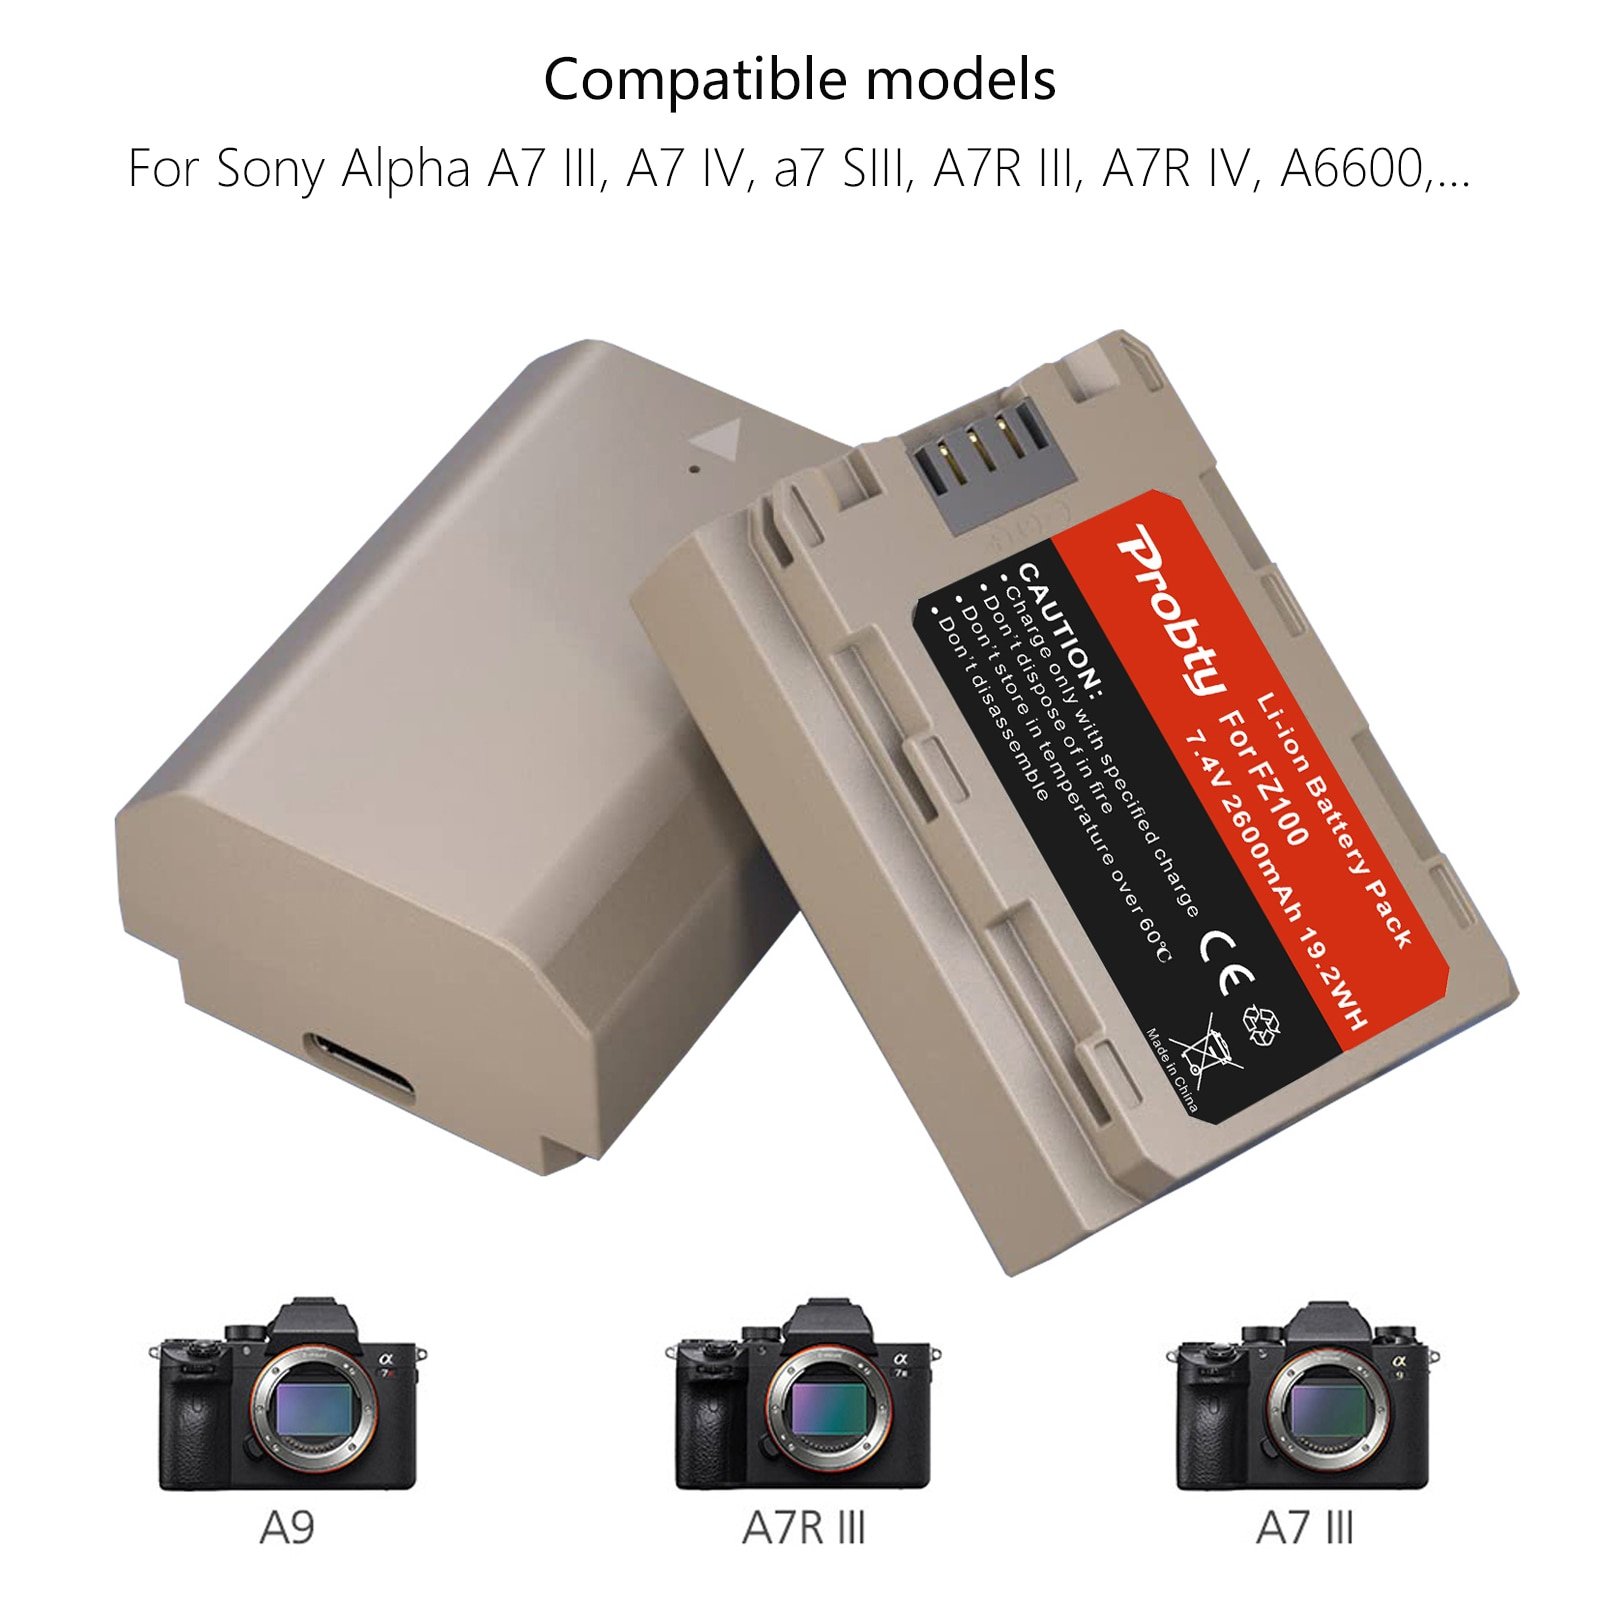 Newly upgraded NP-FZ100 Rechargeable Battery with Type-C Charging Input for Sony Alpha A7 III, A7 IV, a7 SIII, A7R III, A7R IV